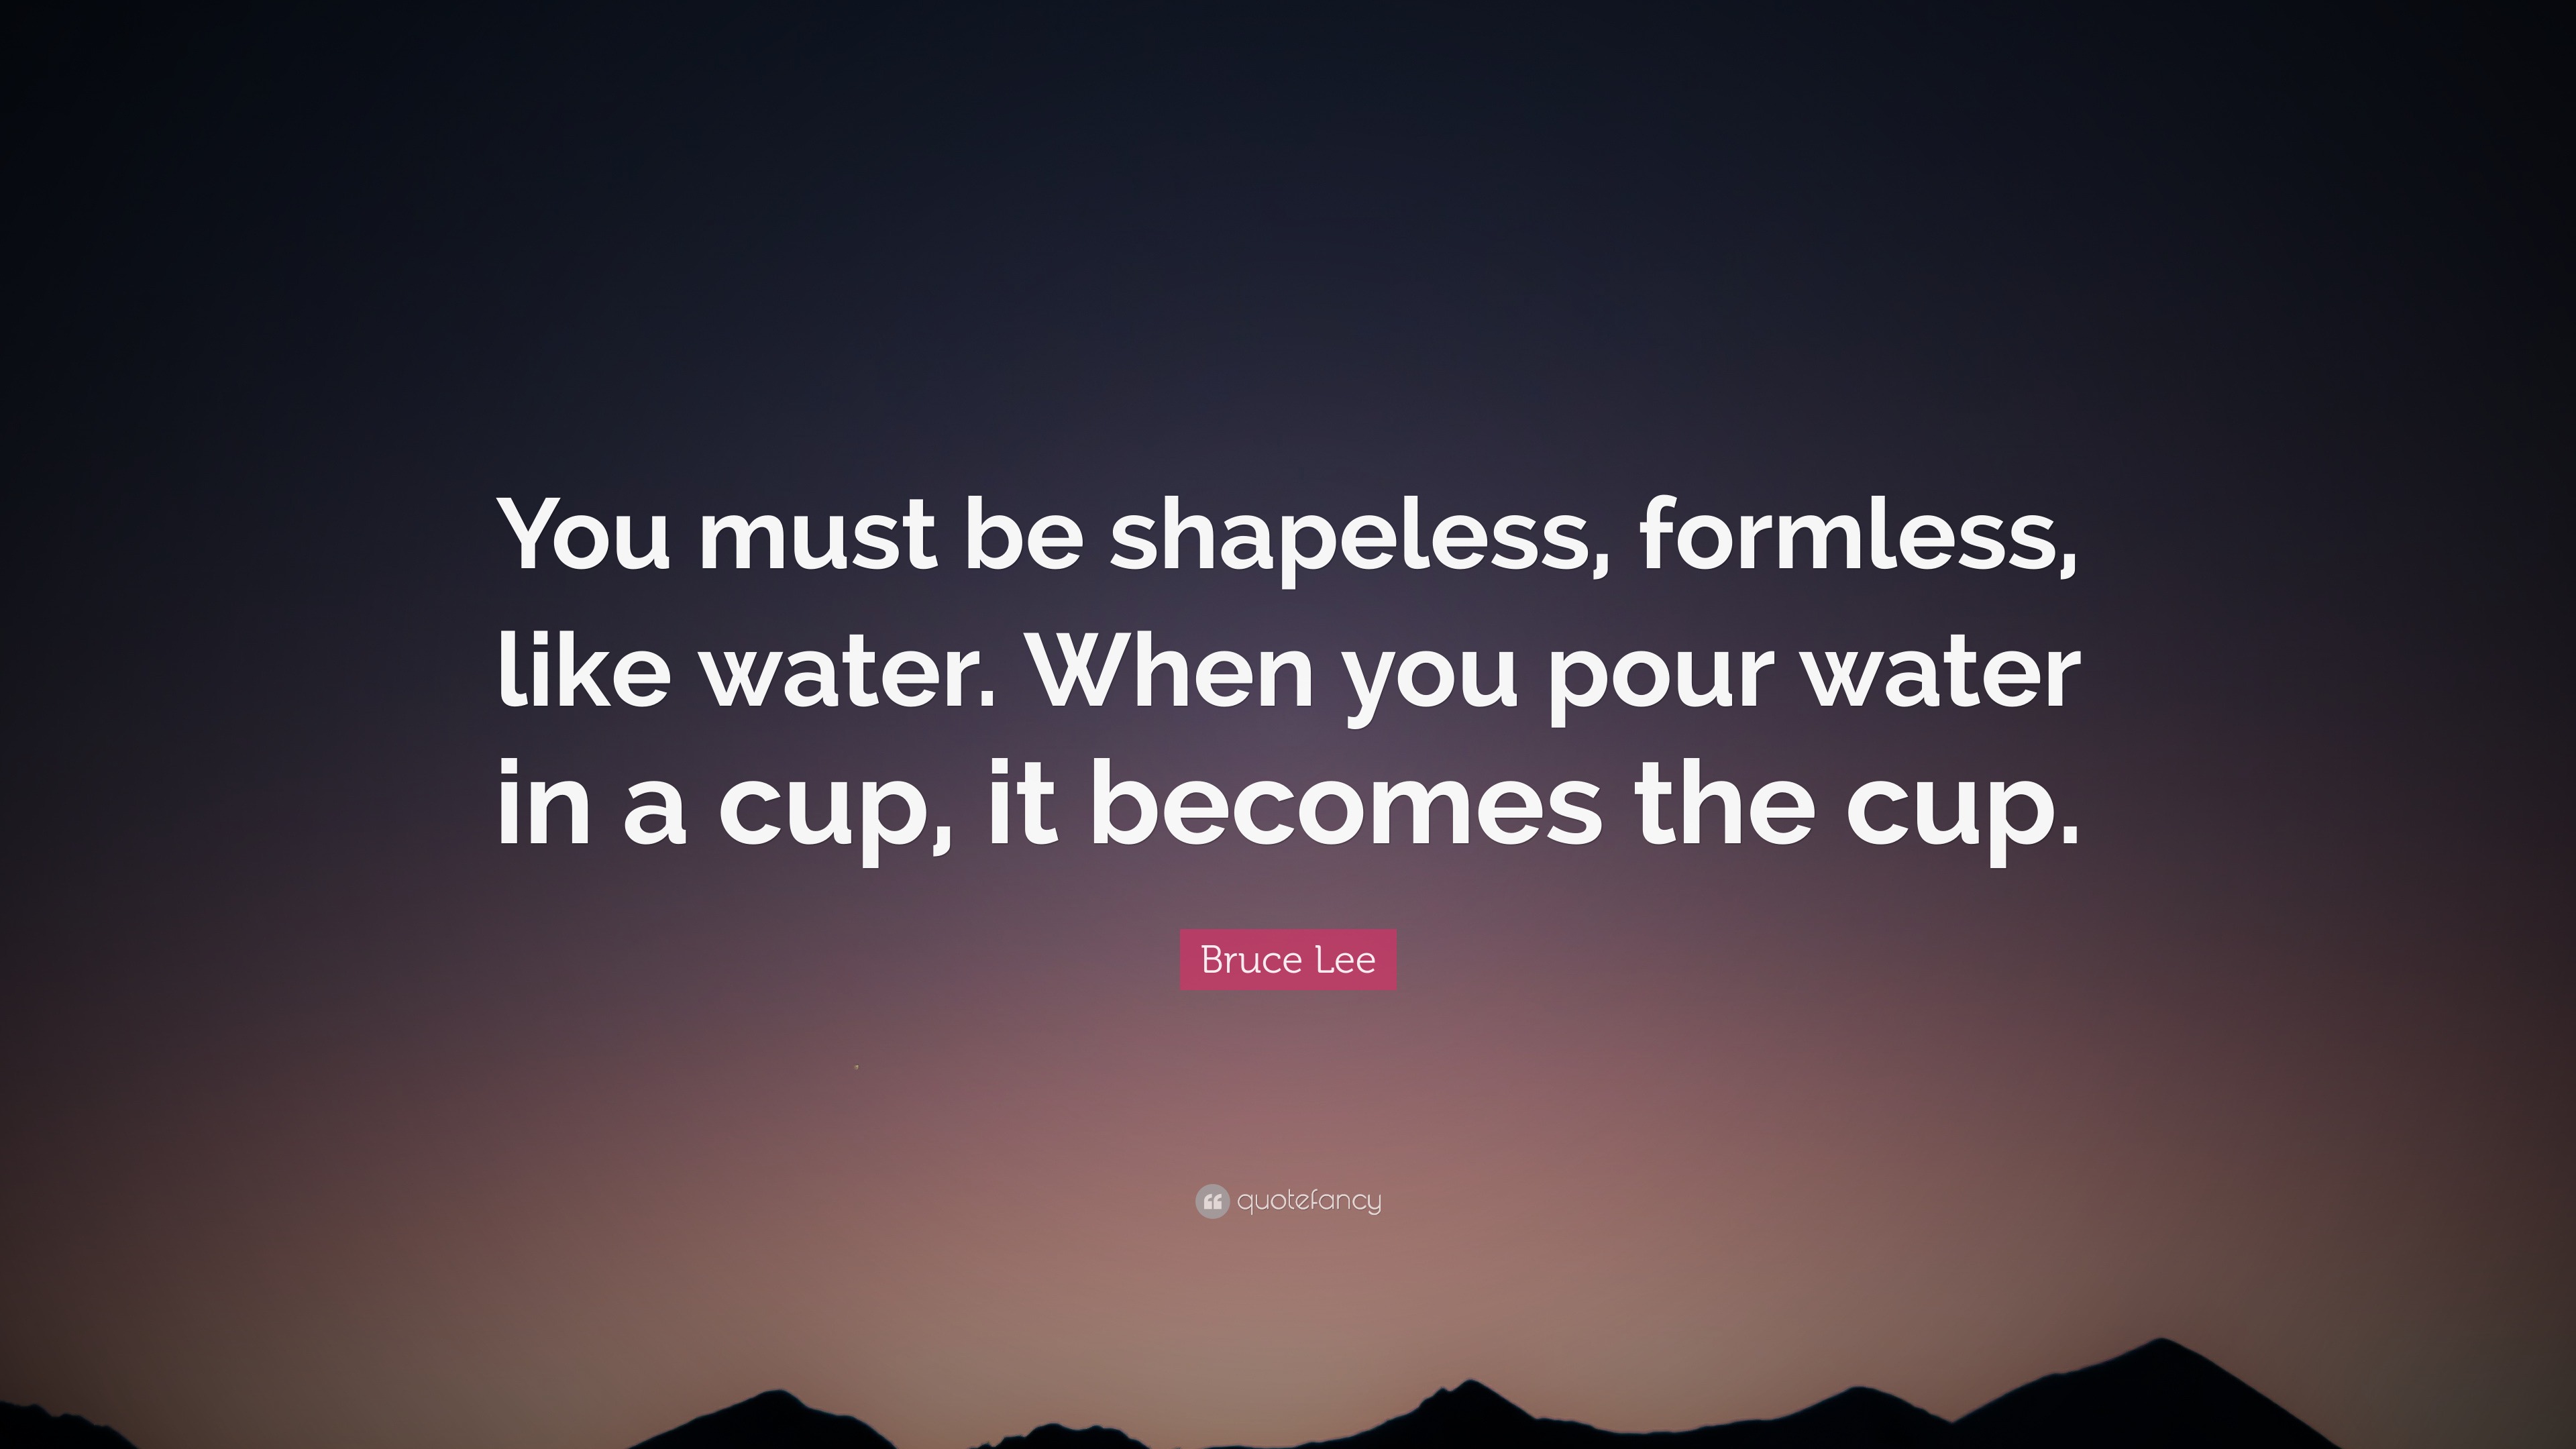 Bruce Lee Quote You Must Be Shapeless Formless Like Water When You Pour Water In A